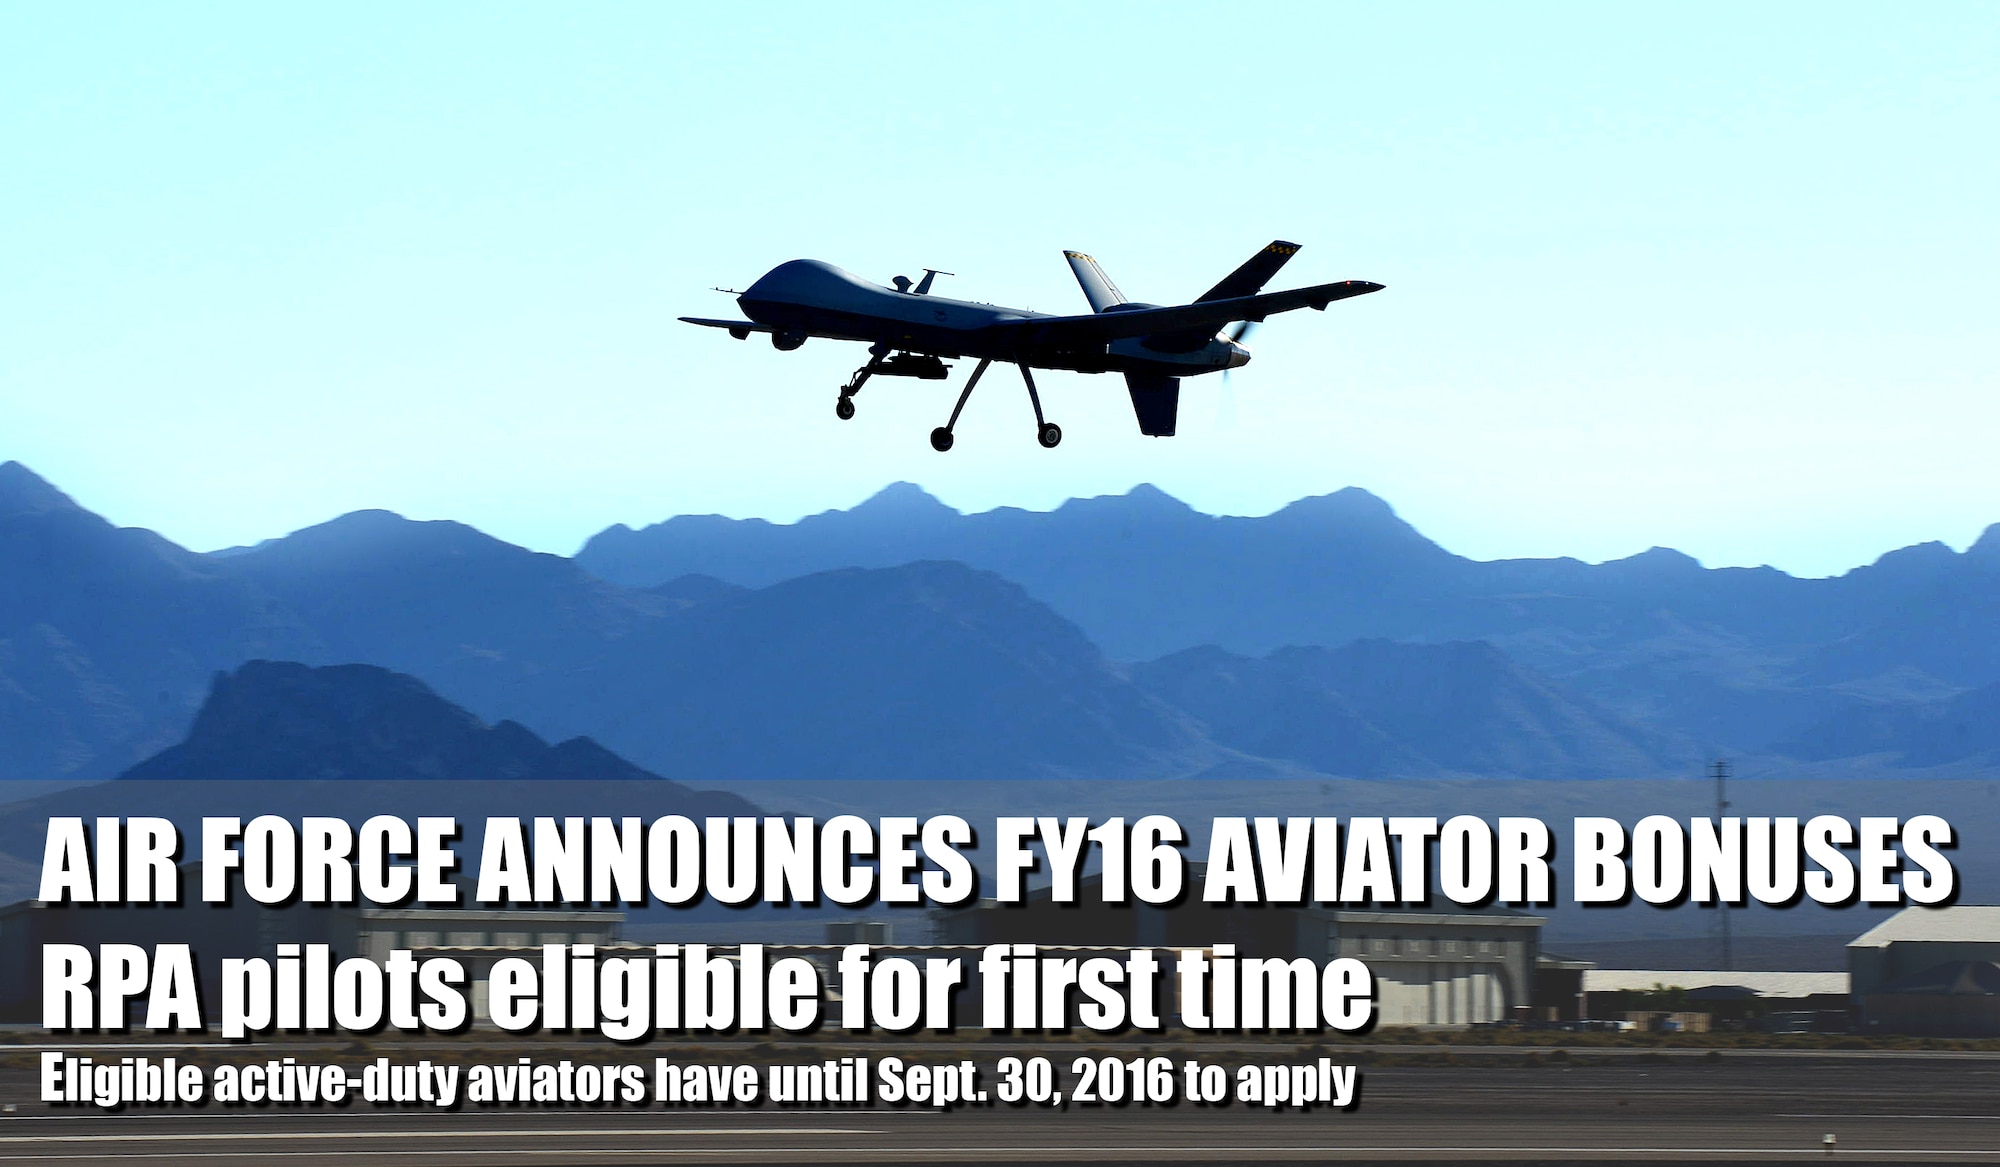 Eligible active-duty aviators have until Sept. 30 to apply for the fiscal year 2016 Aviator Retention Pay or Critical Skills Retention Bonus programs, Air Force officials announced Dec. 15. Complete eligibility requirements and application instructions are available on https://mypers.af.mil at the Officer Compensation link in the left hand column. (U.S. Air Force photo by Senior Master Sgt. Cecilio Ricardo)